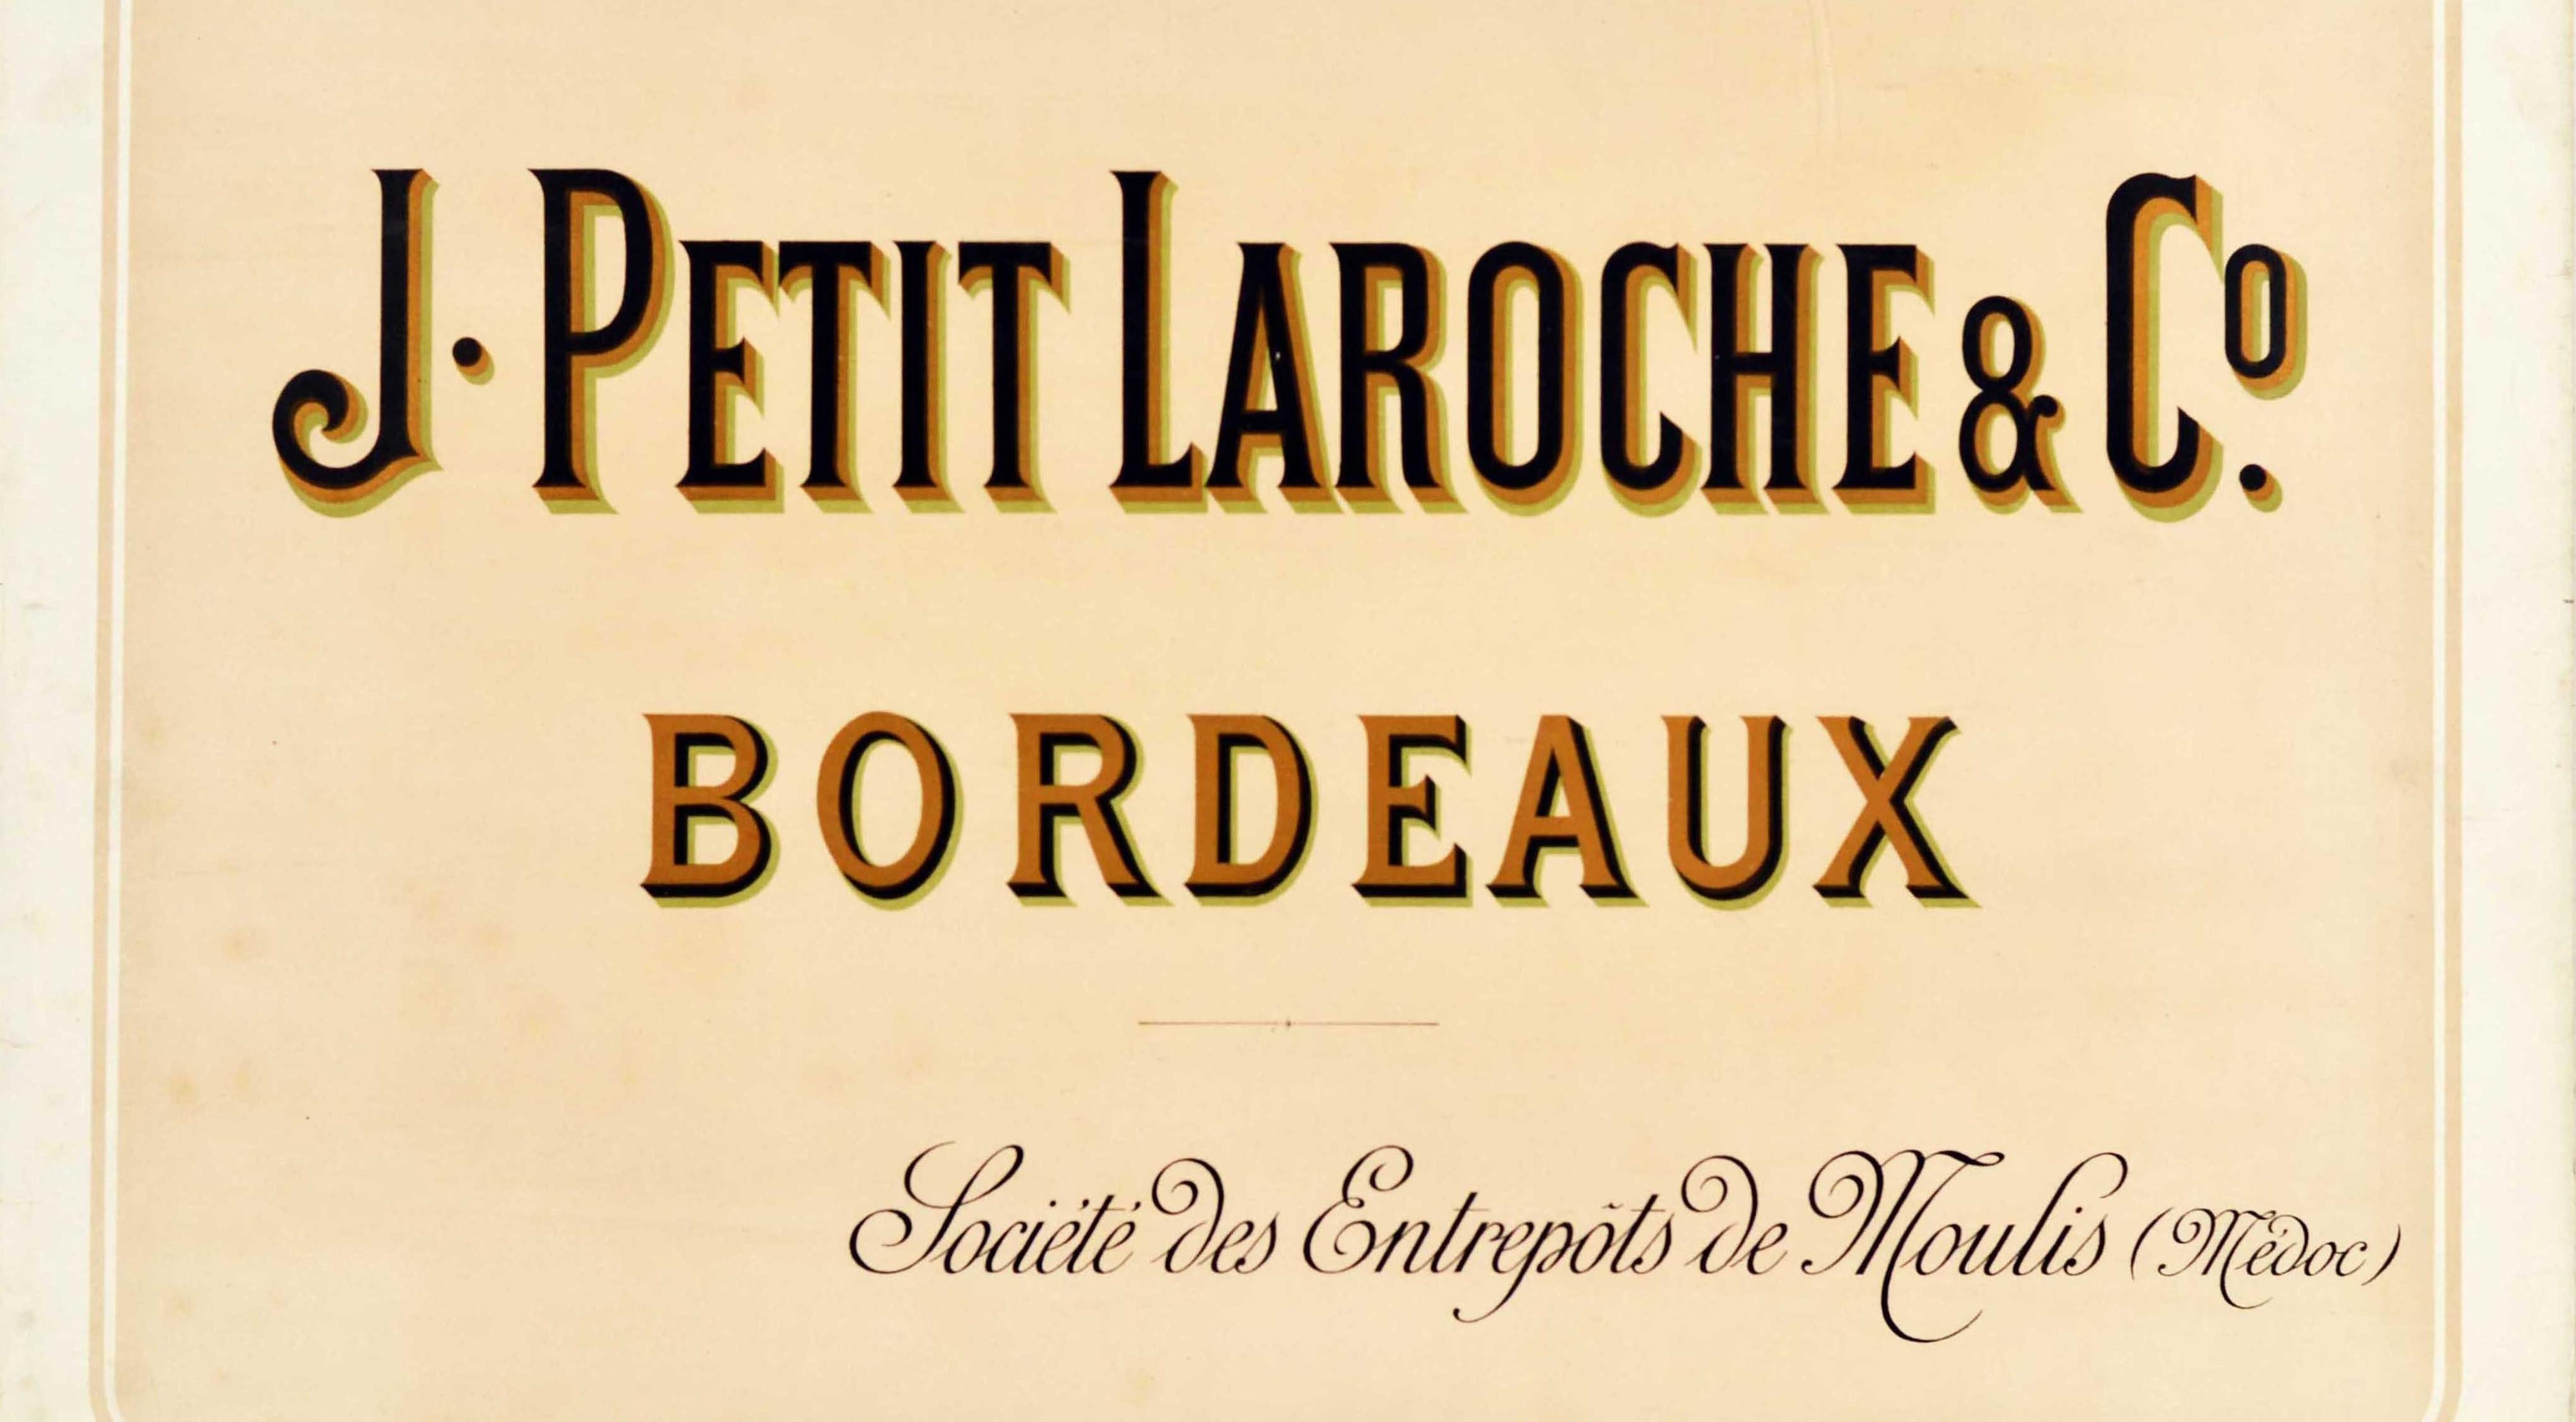 Original antique drink advertising poster for J. Petit Laroche & Co Bordeaux Societe des Entrepots de Moulis Medoc featuring the title text of the wine makers in bold and rest of the text in stylised lettering below. Horizontal. Good condition,